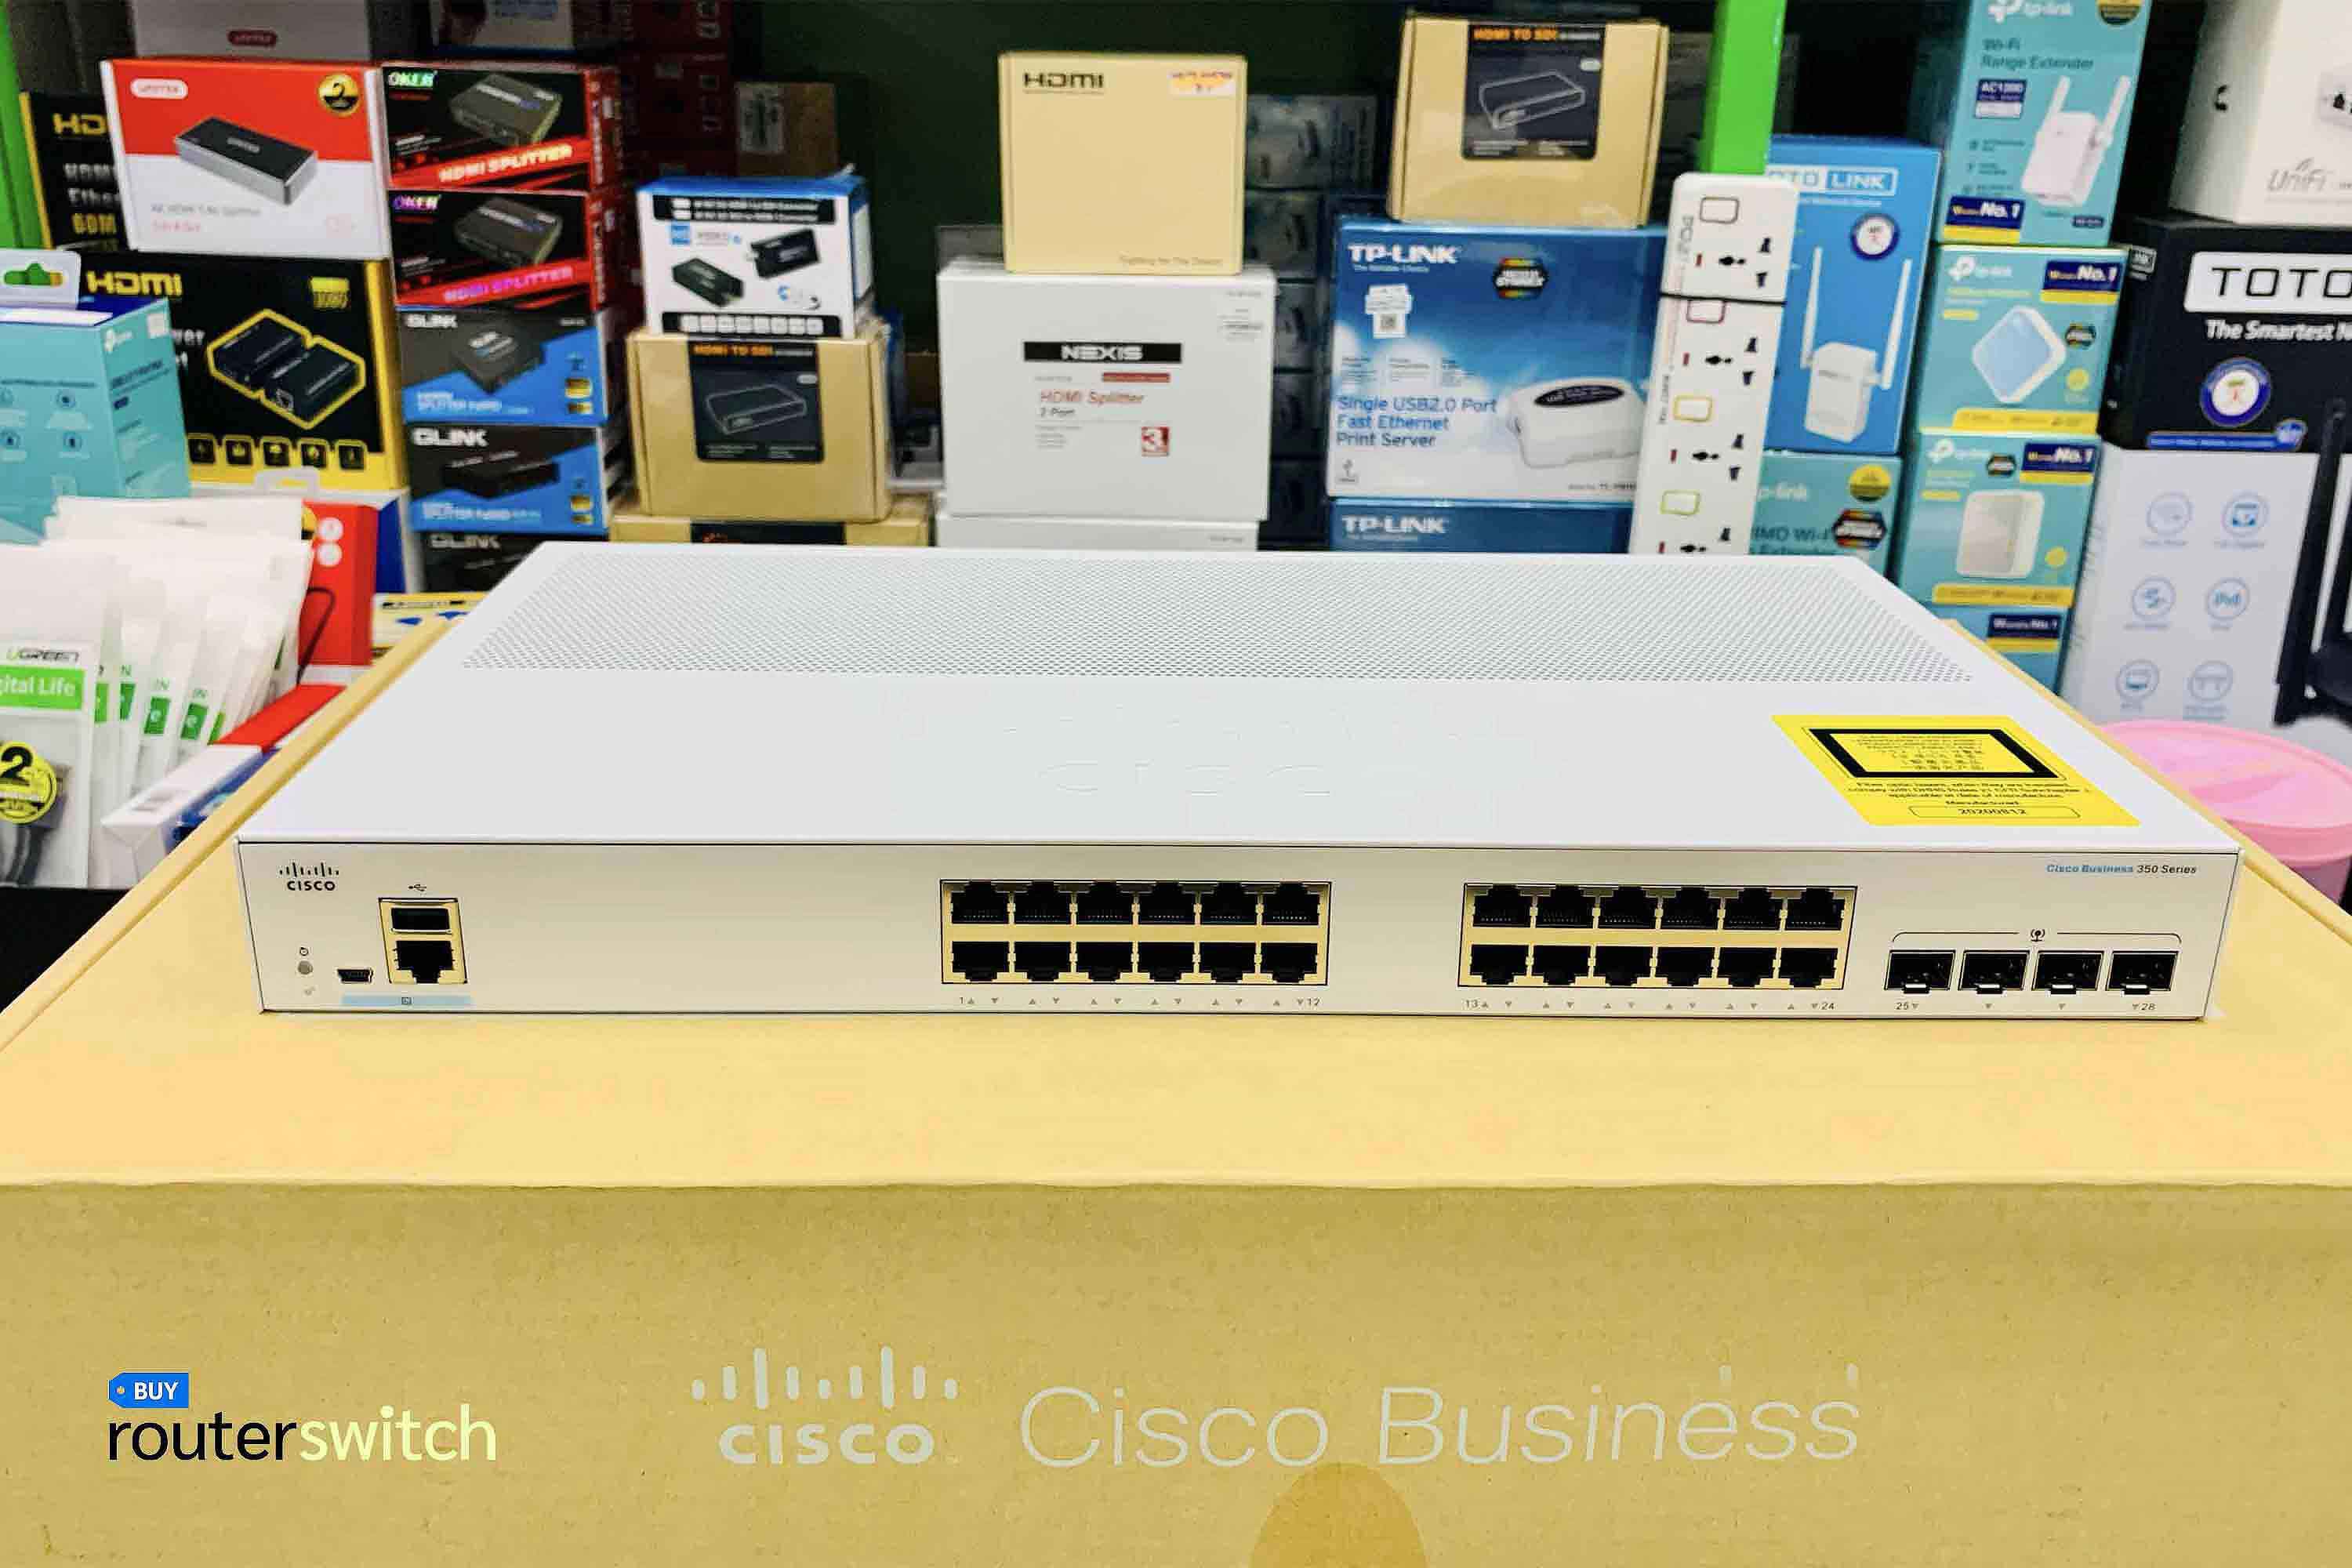 Review of Cisco CBS350-24T-4G Switch - Features, Performance and Price